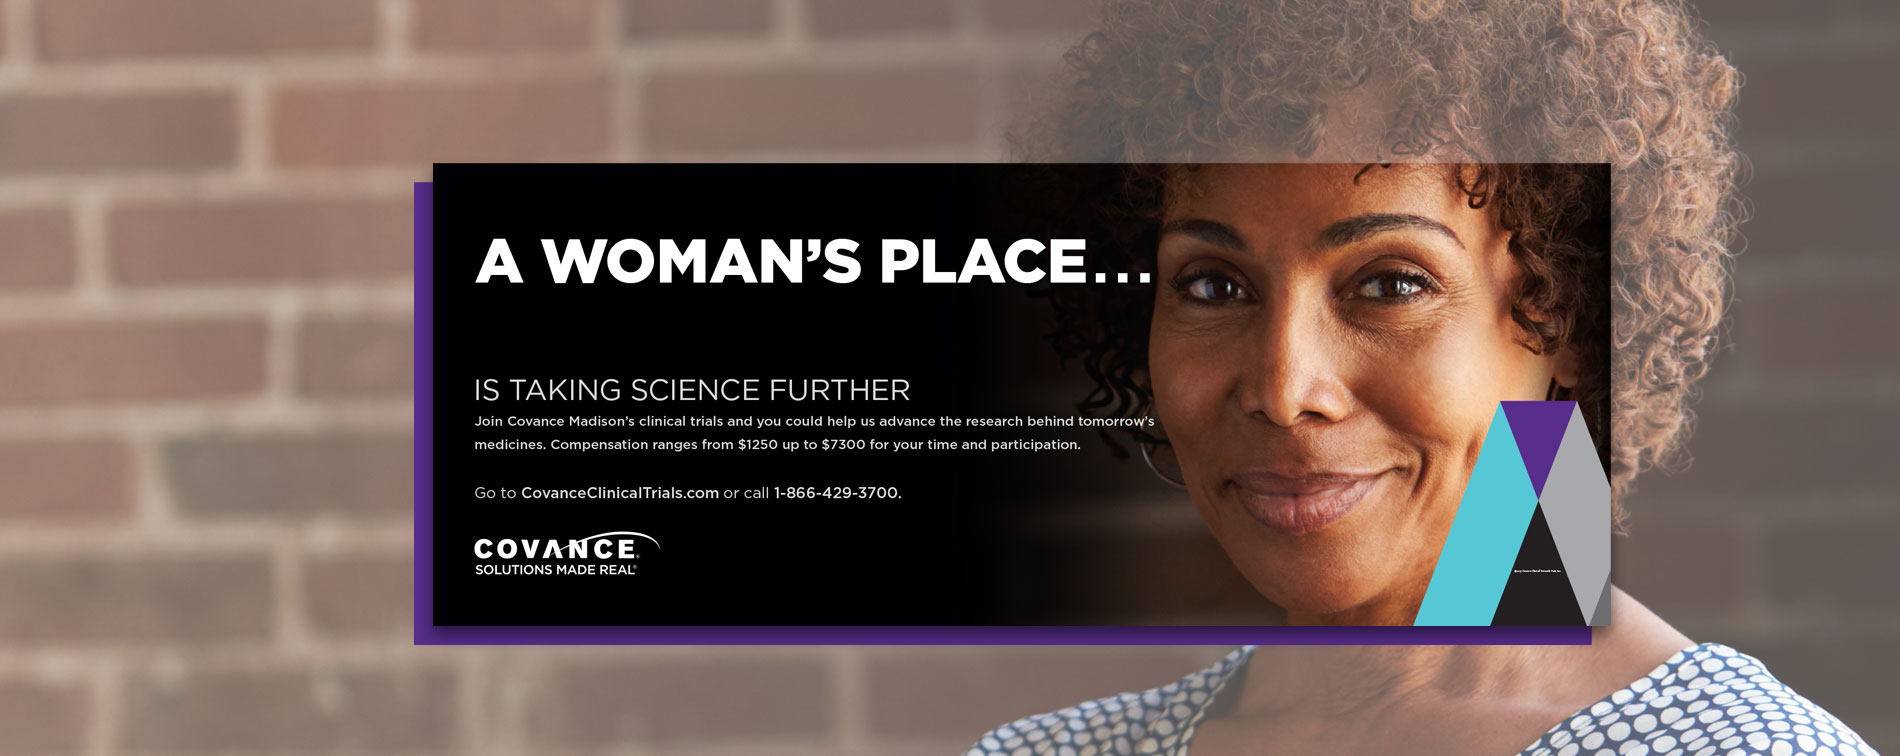 Covance bus ad: A woman's place is taking science further